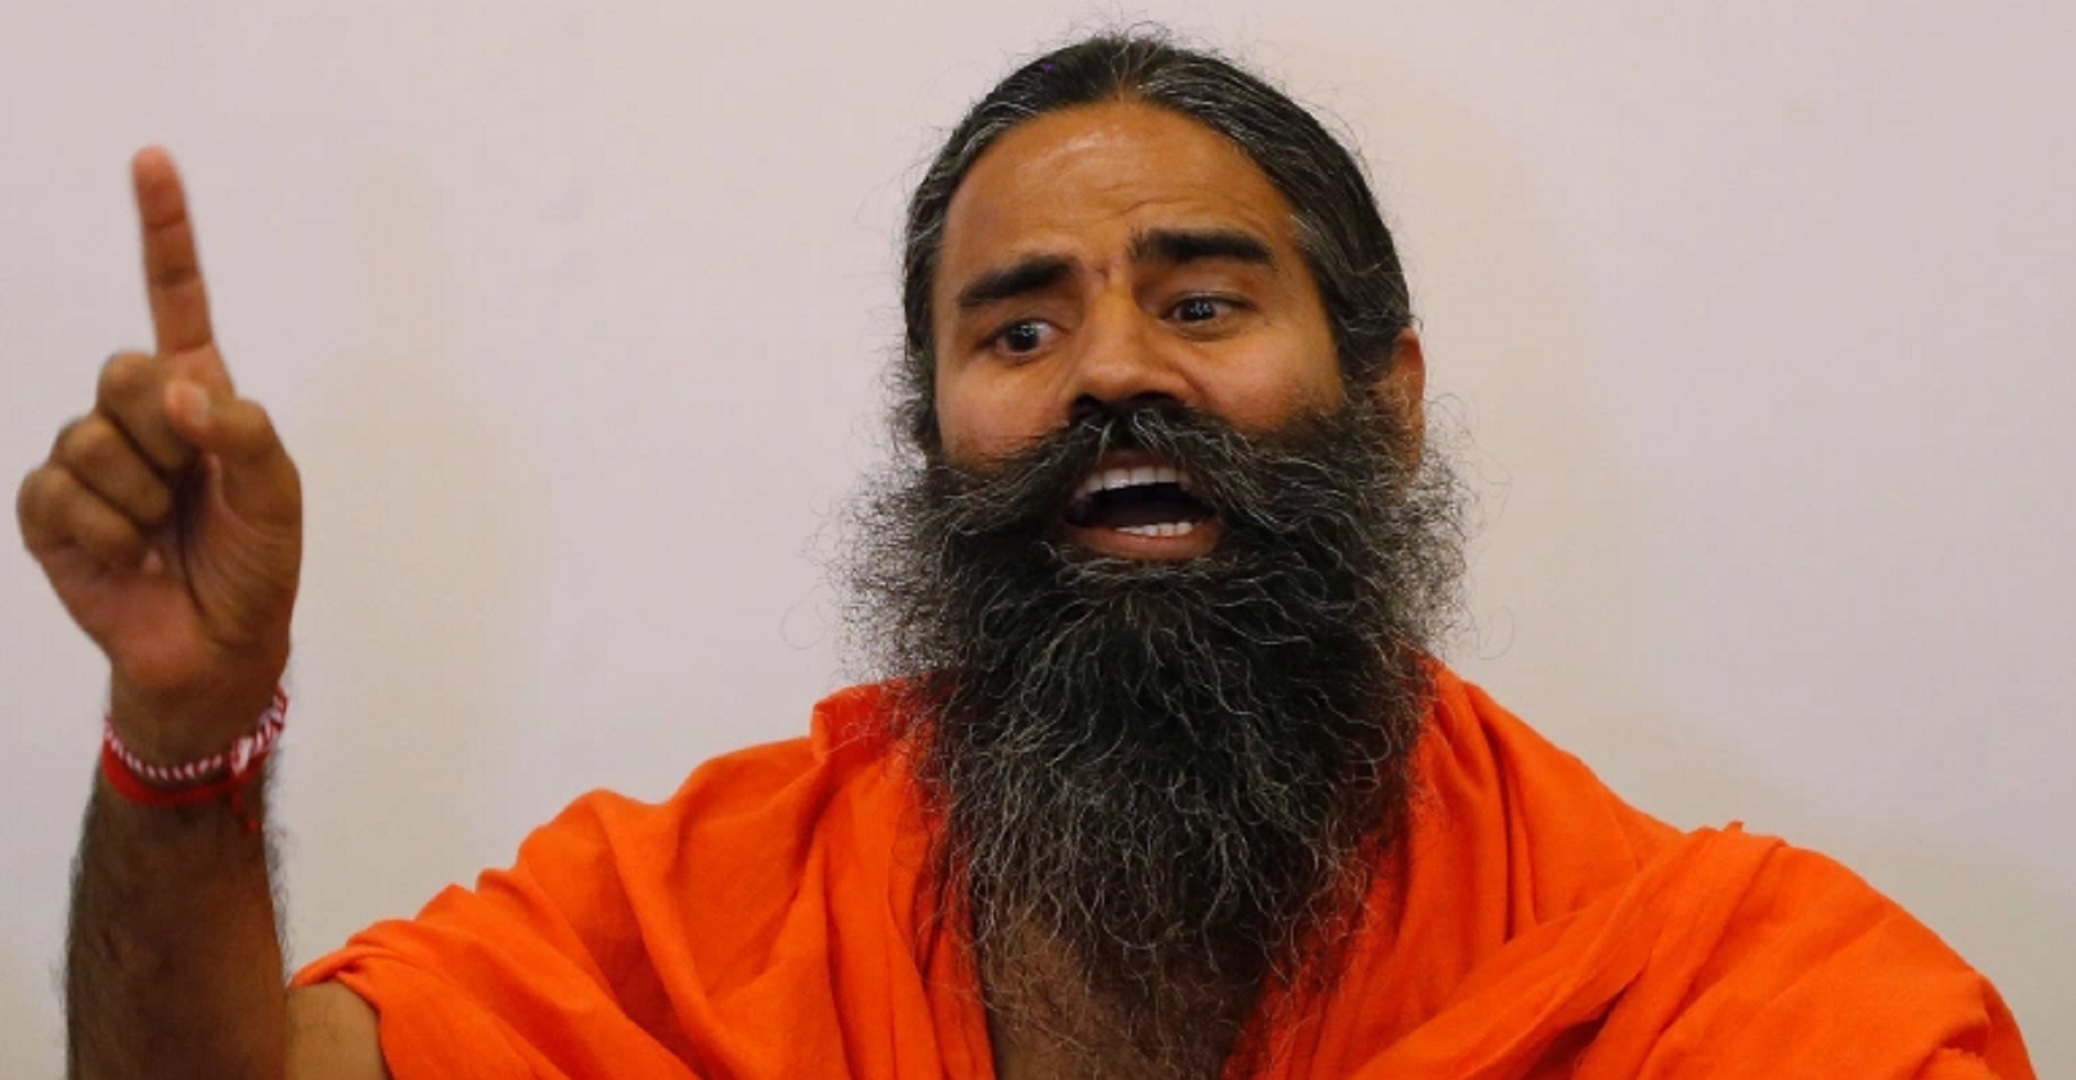 “Even Their Baap Can’t Arrest Me” Says Baba Ramdev On Feud With Doctors